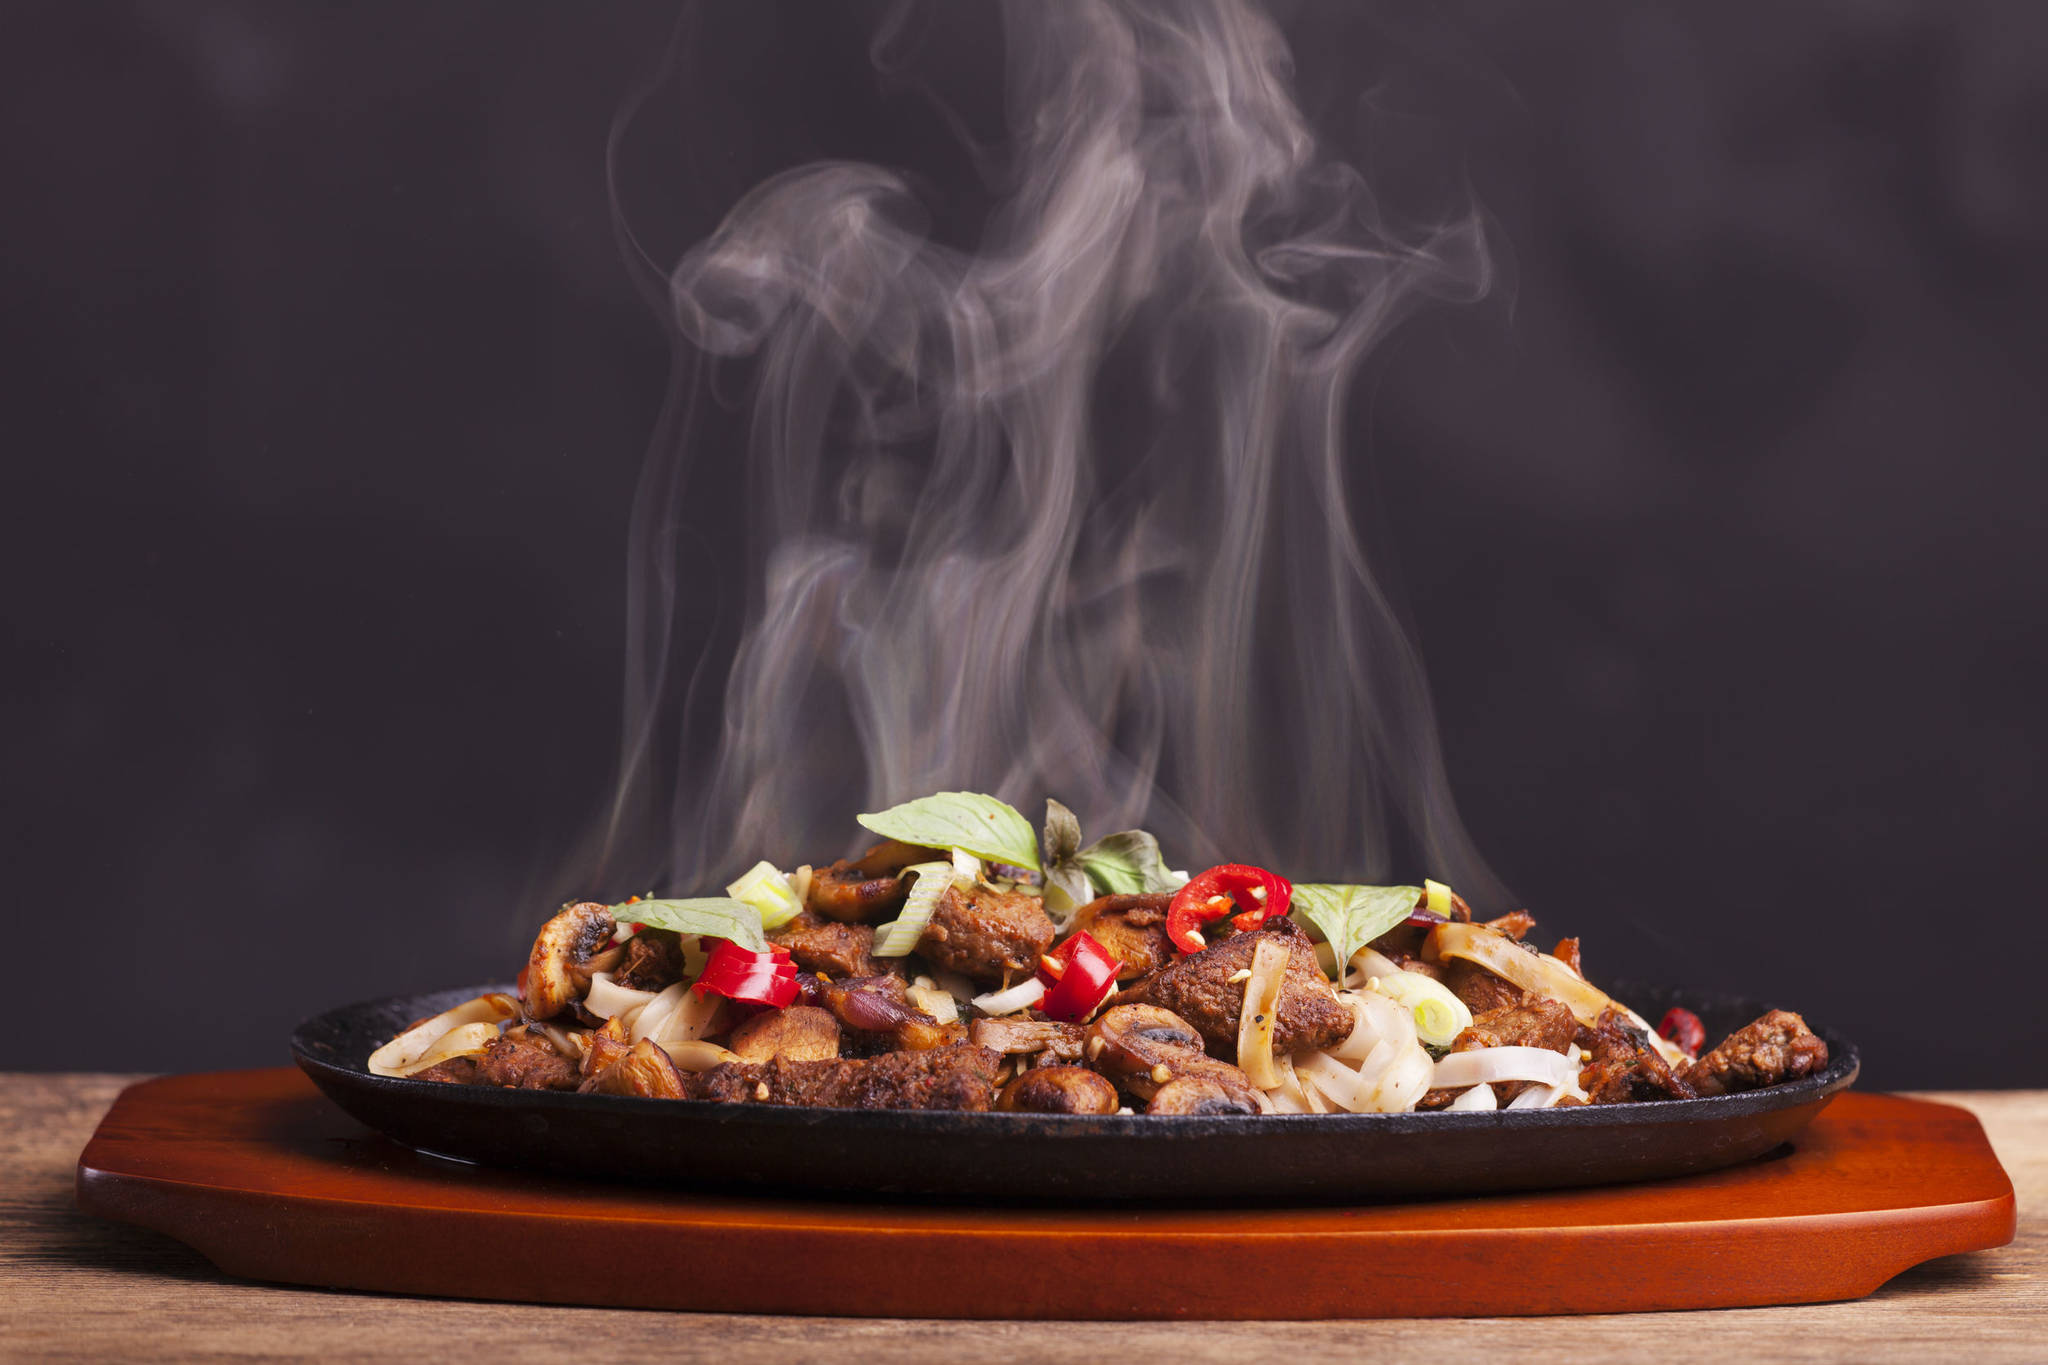 Steaming chicken sizzler with noodles (123rf.com Stock Photo)